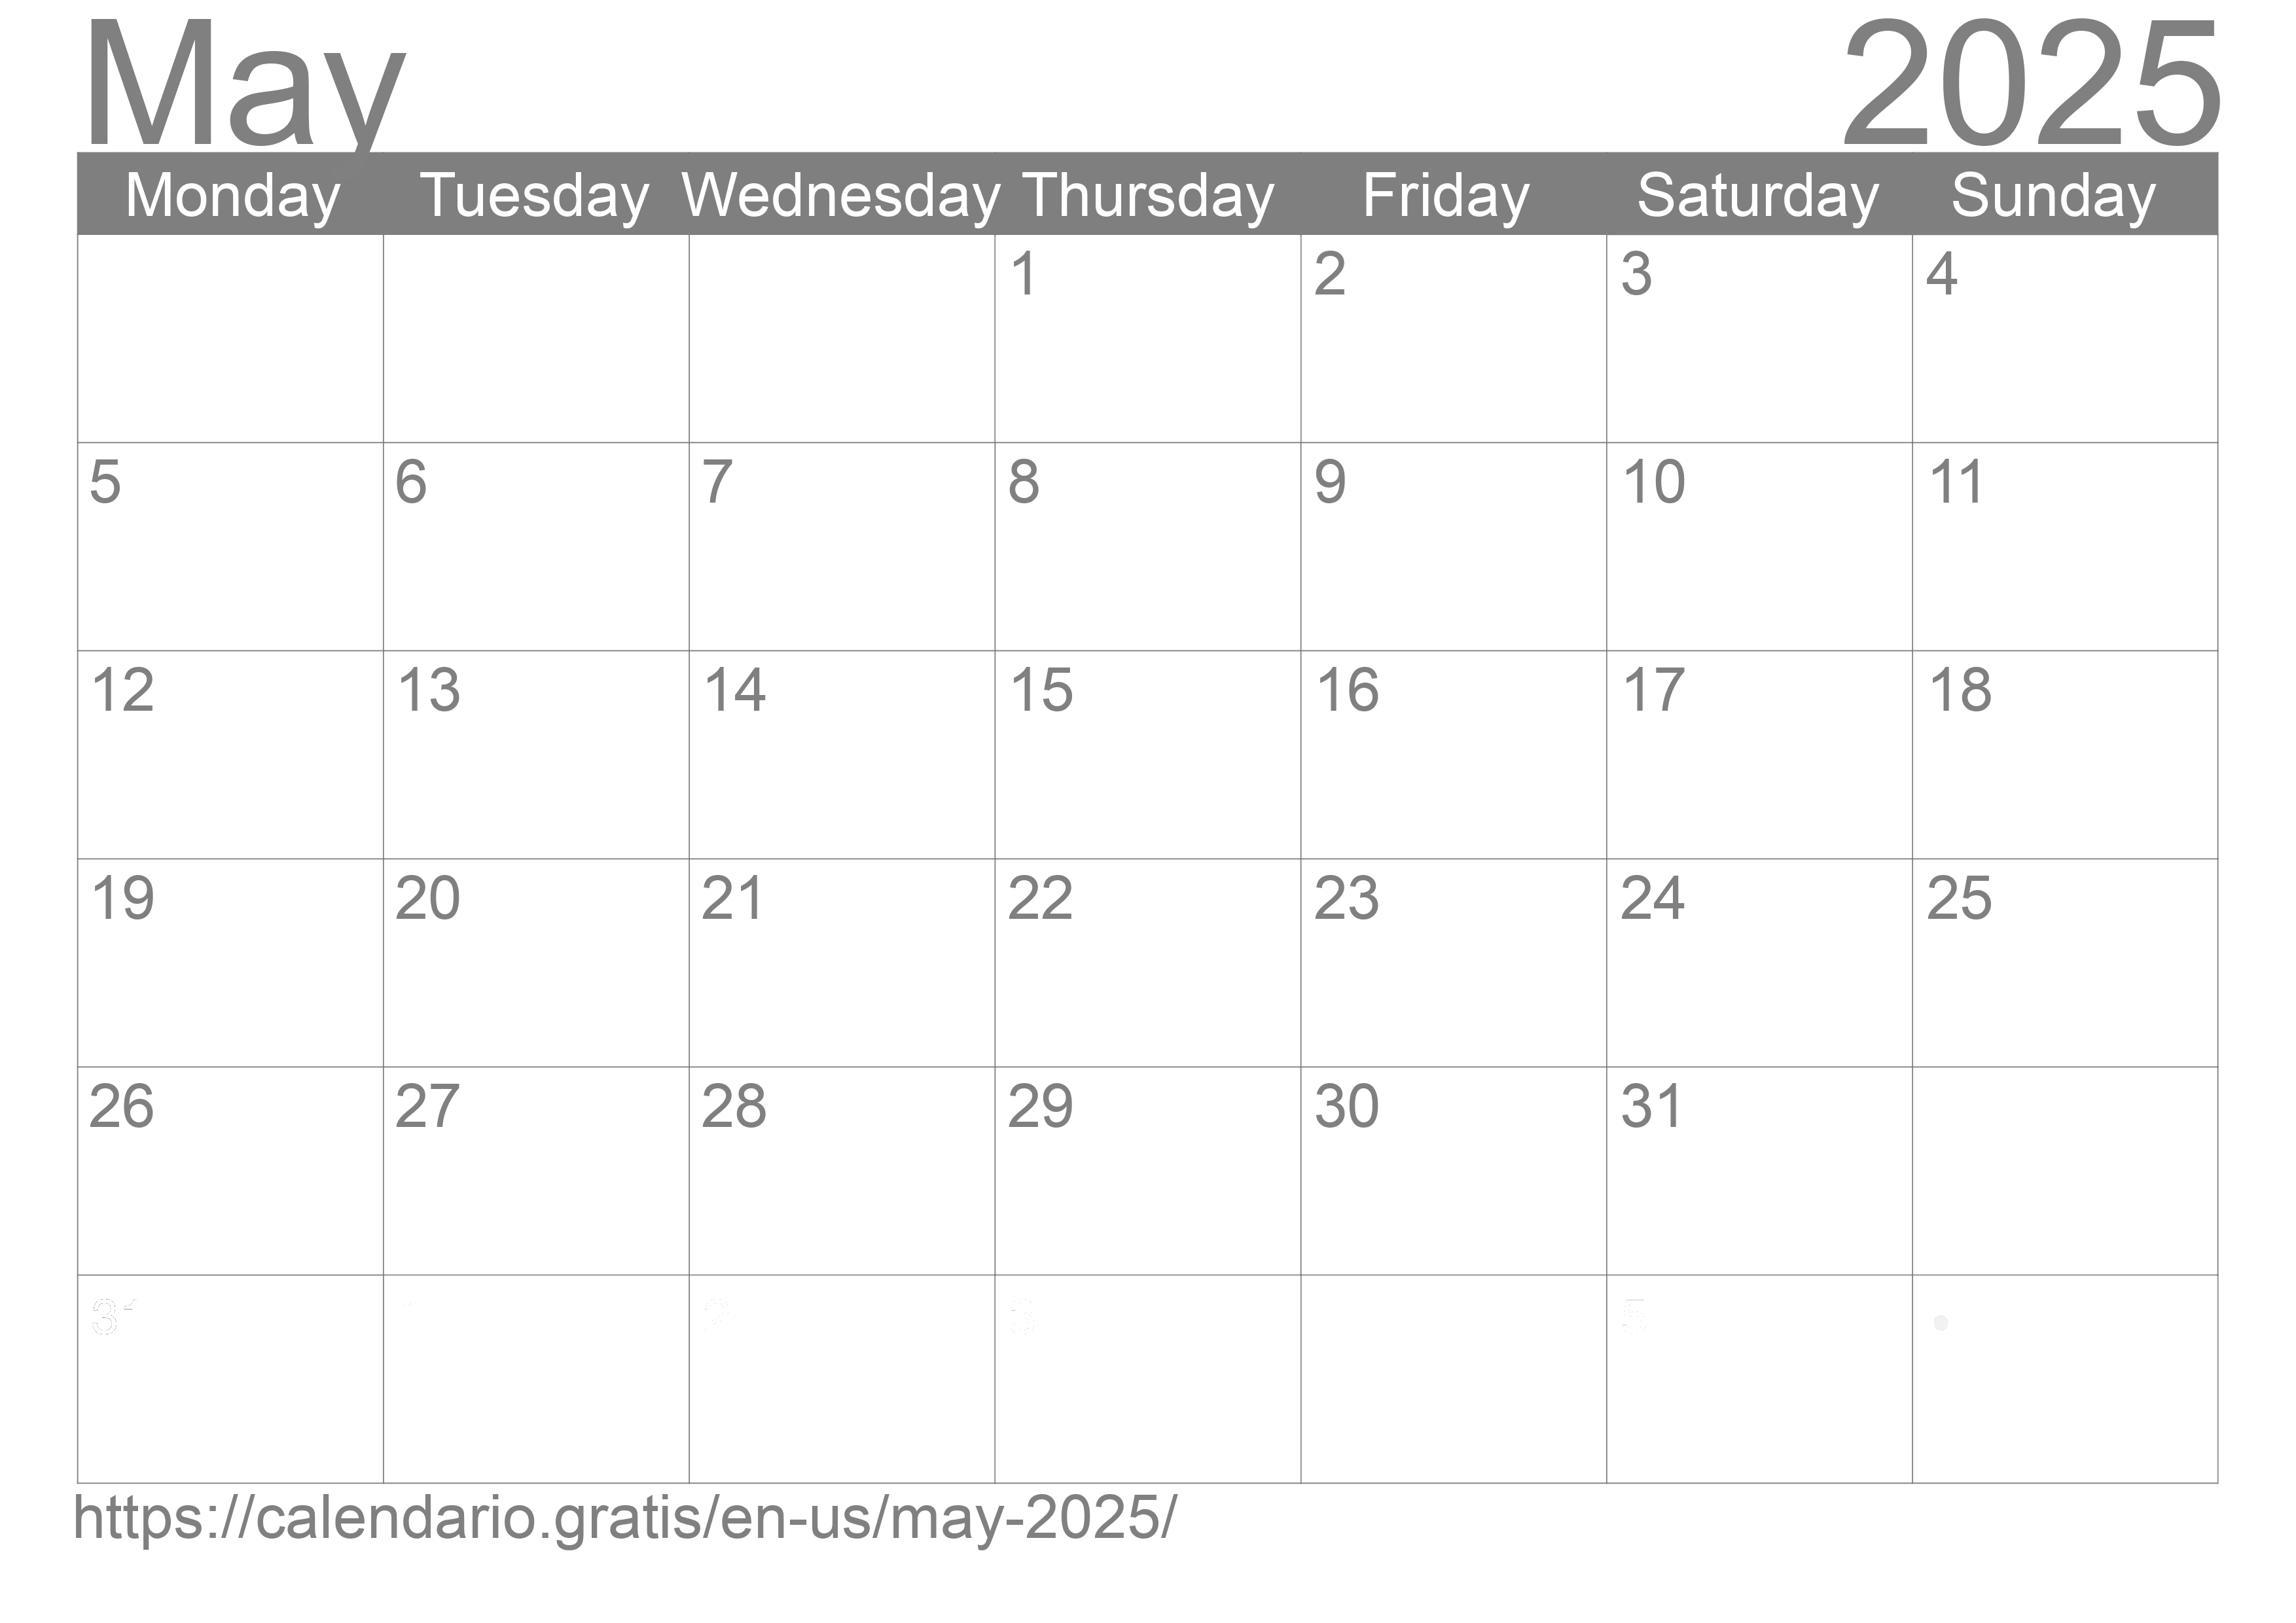 Calendar May 2025 from United States of America in English ☑️